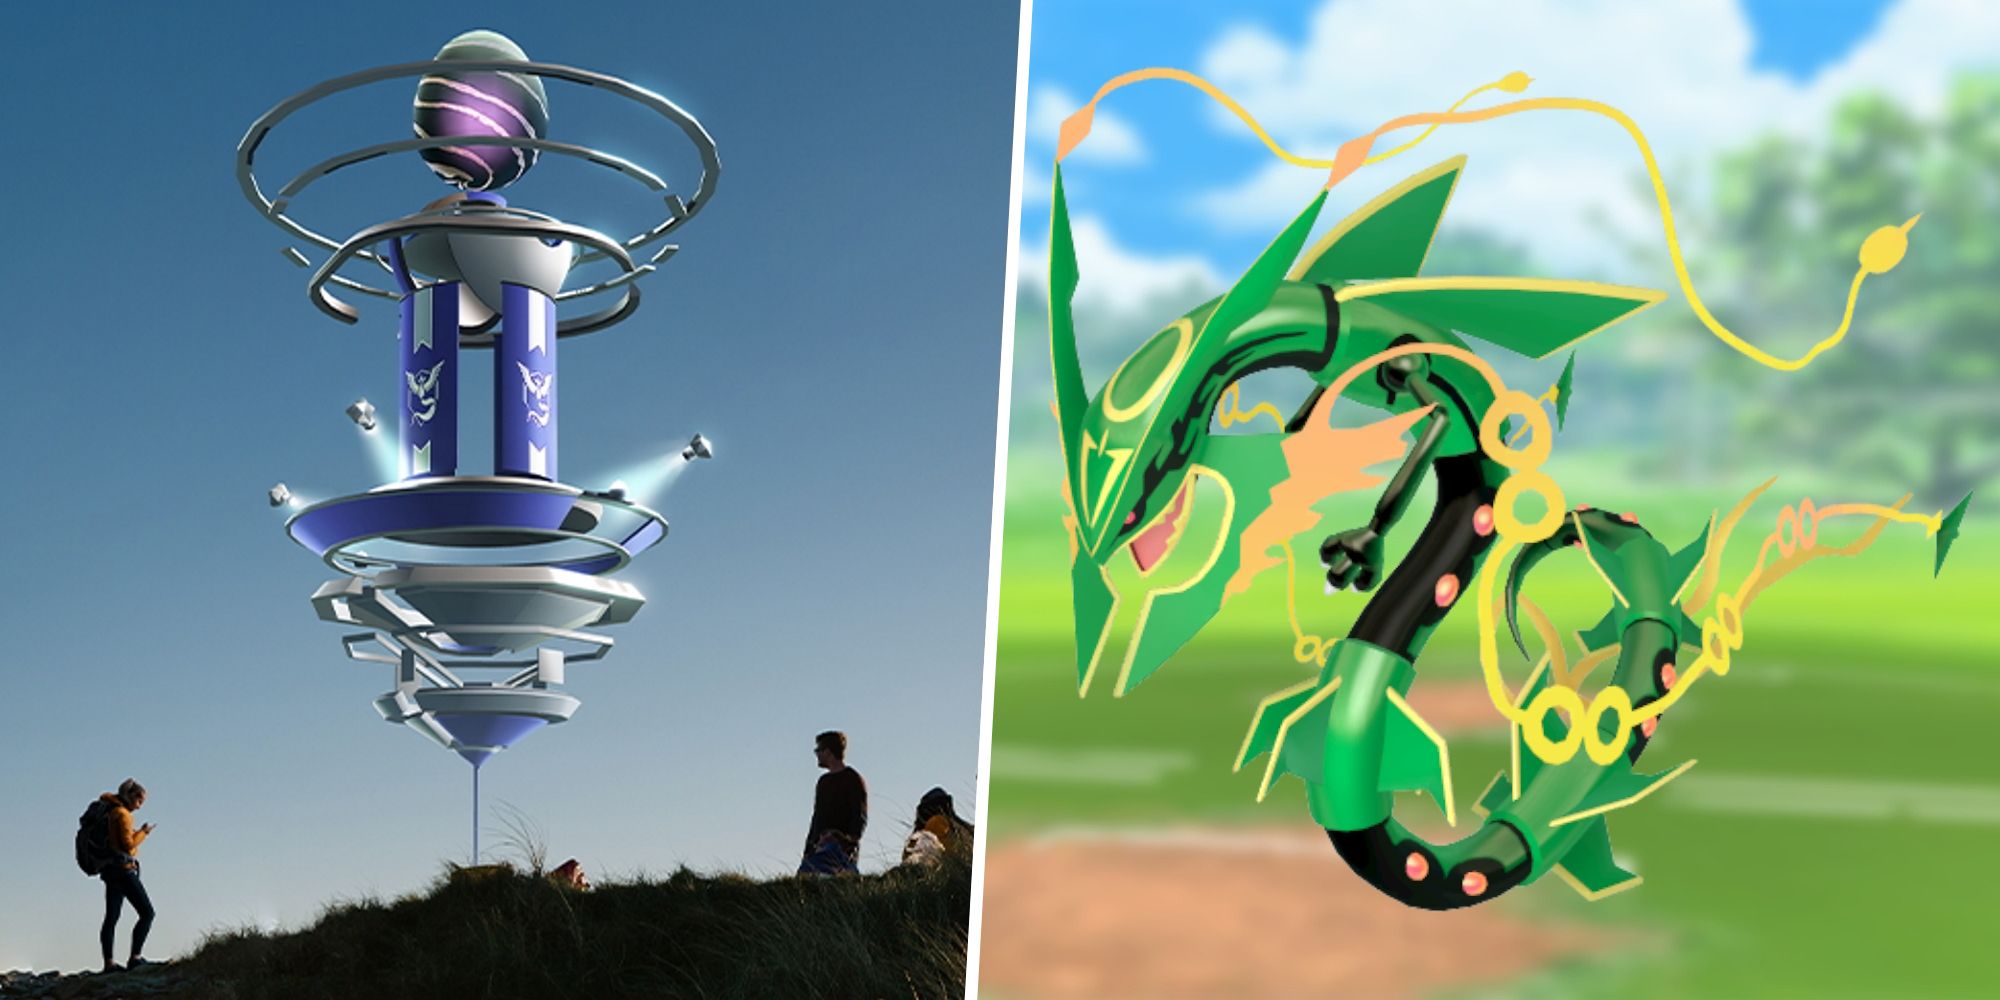 Rayquaza Raid Guide: How To Catch A Shiny Rayquaza In Pokémon GO